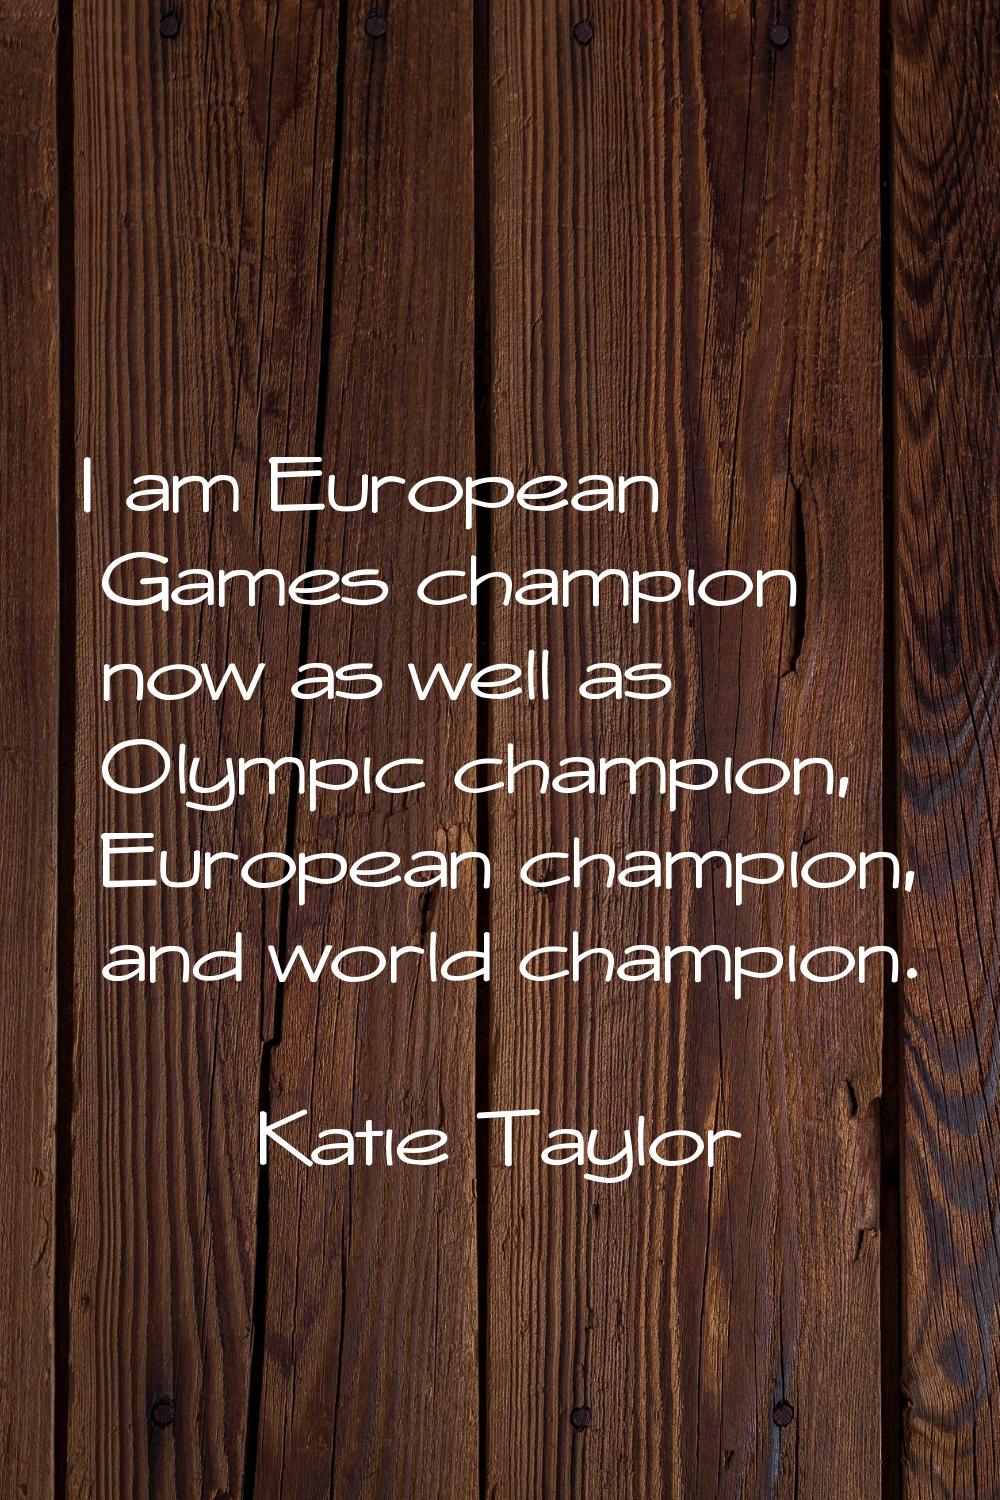 I am European Games champion now as well as Olympic champion, European champion, and world champion